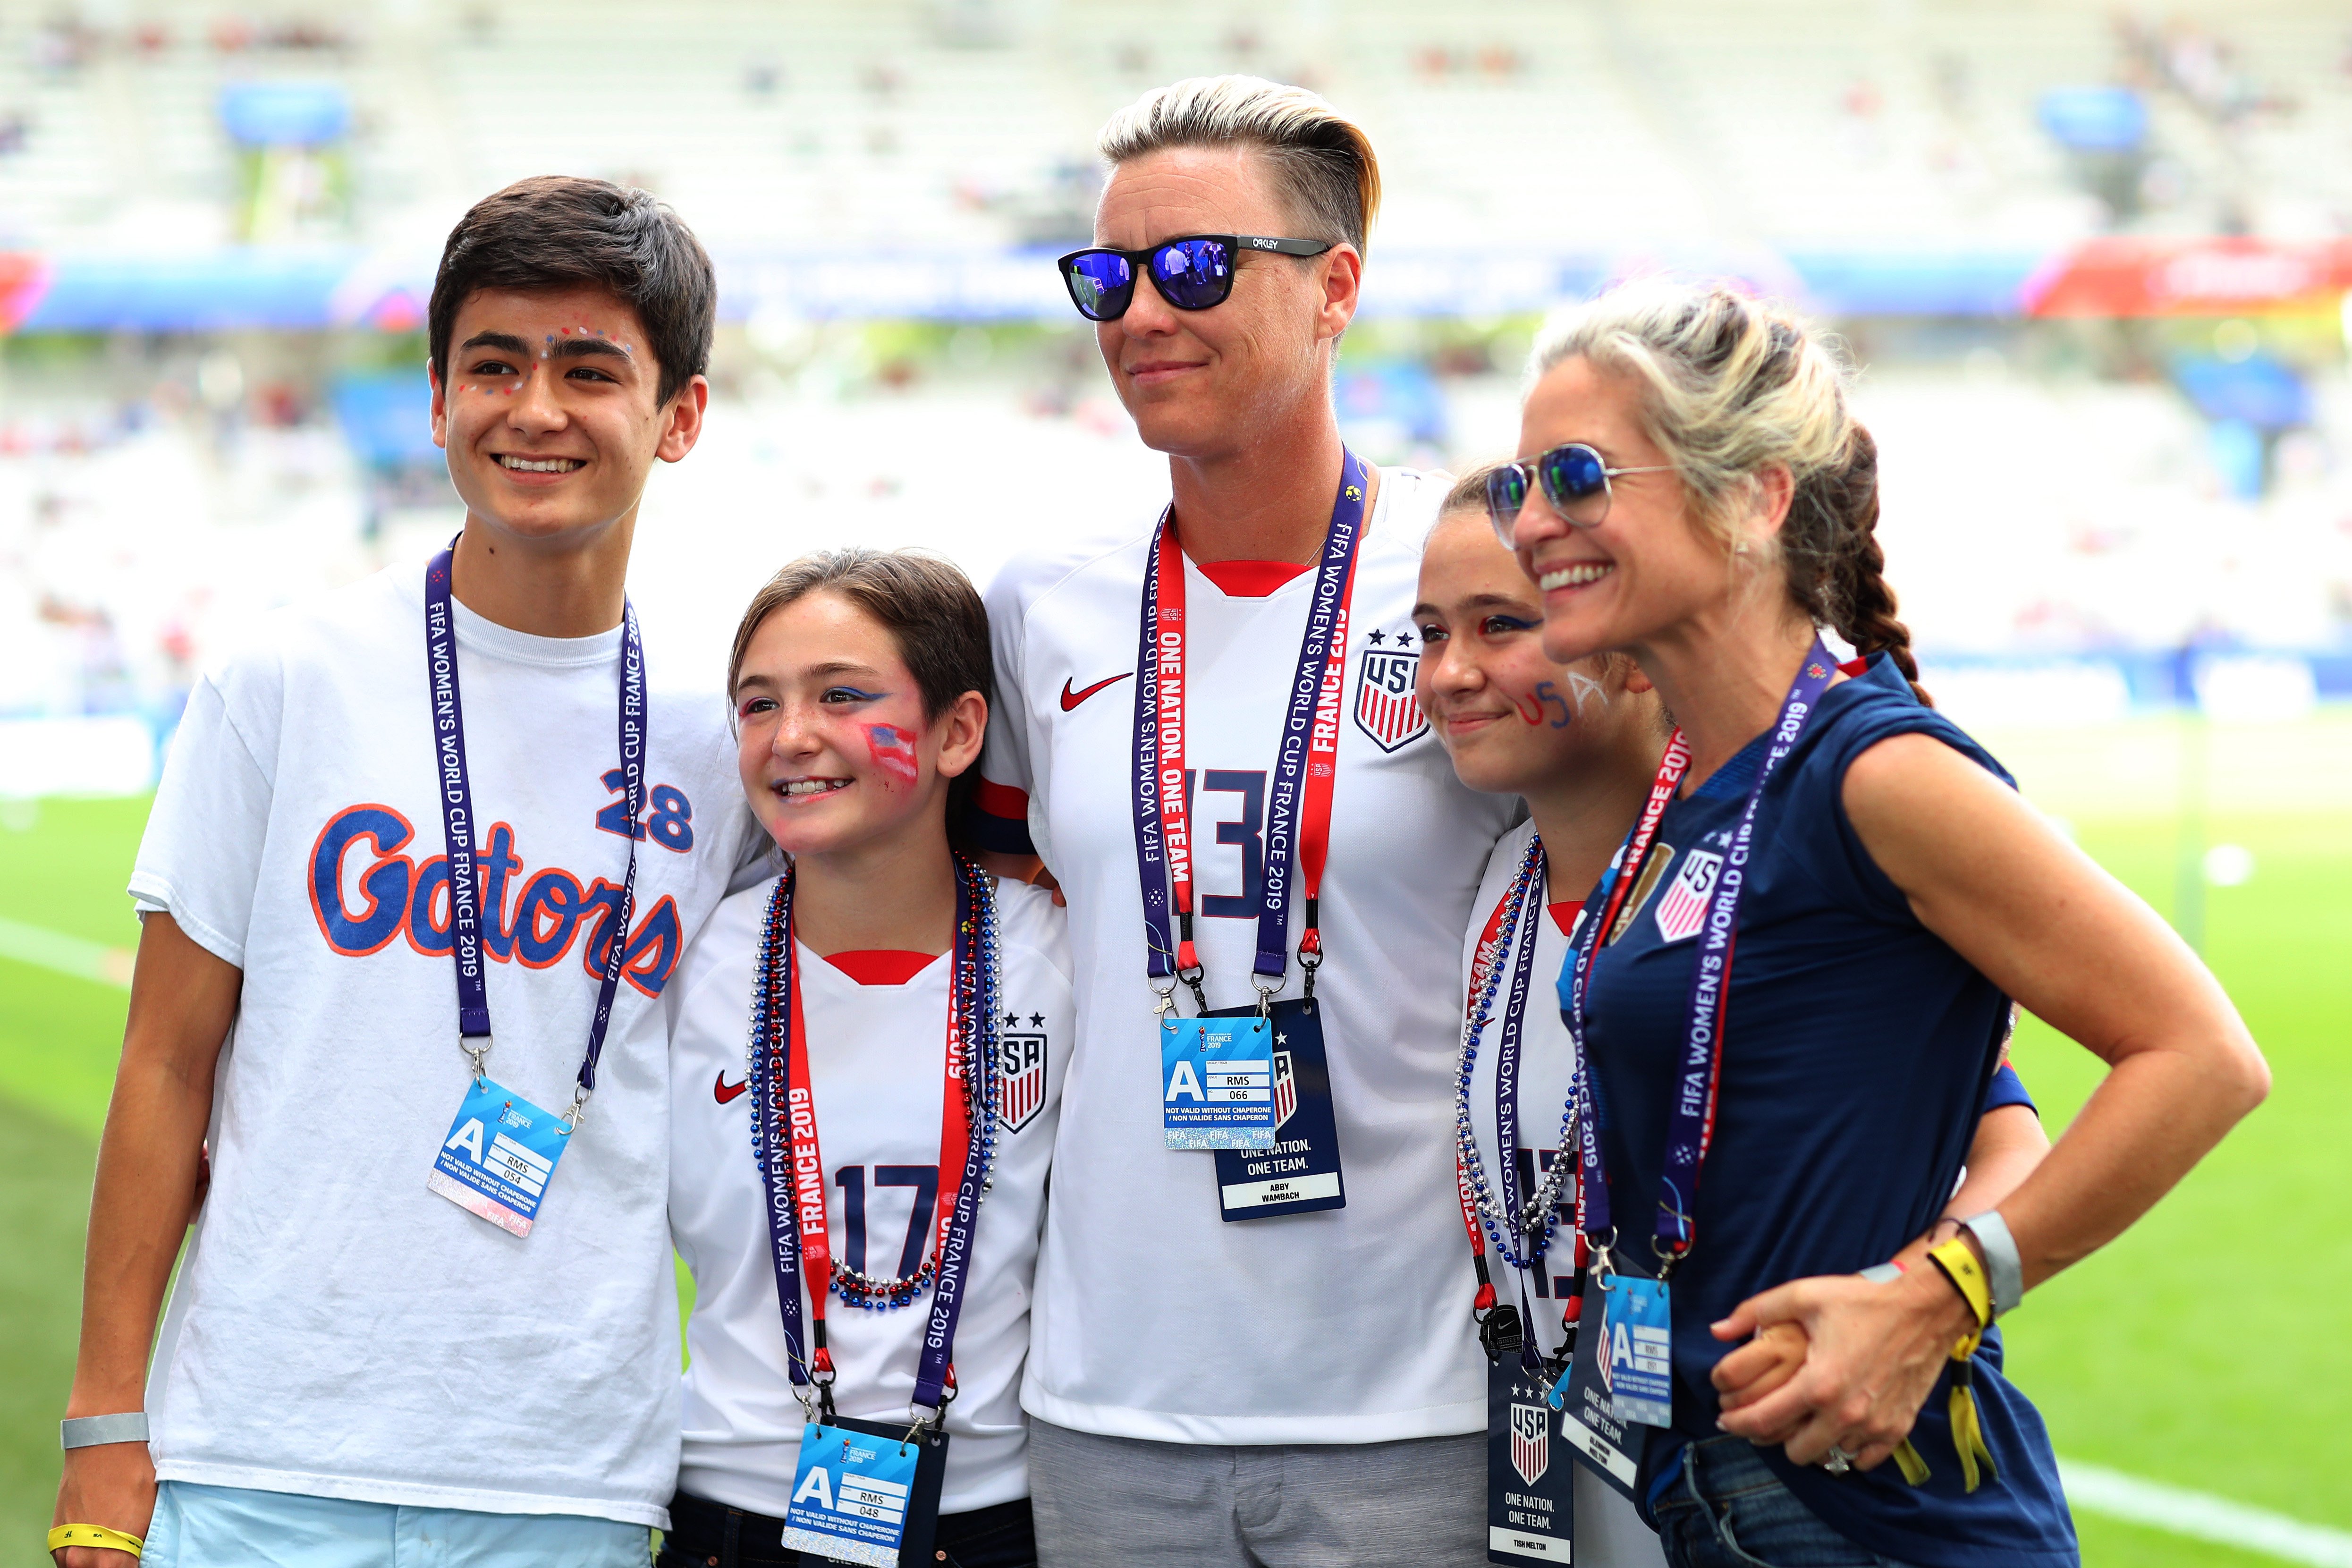 Abby Wambach and Glennon Doyle together with Chase, Amma, and Tish Melton at the 2019 FIFA Women's World Cup France between Spain and USA on June 24, 2019, in Reims, France. | Source: Getty Images